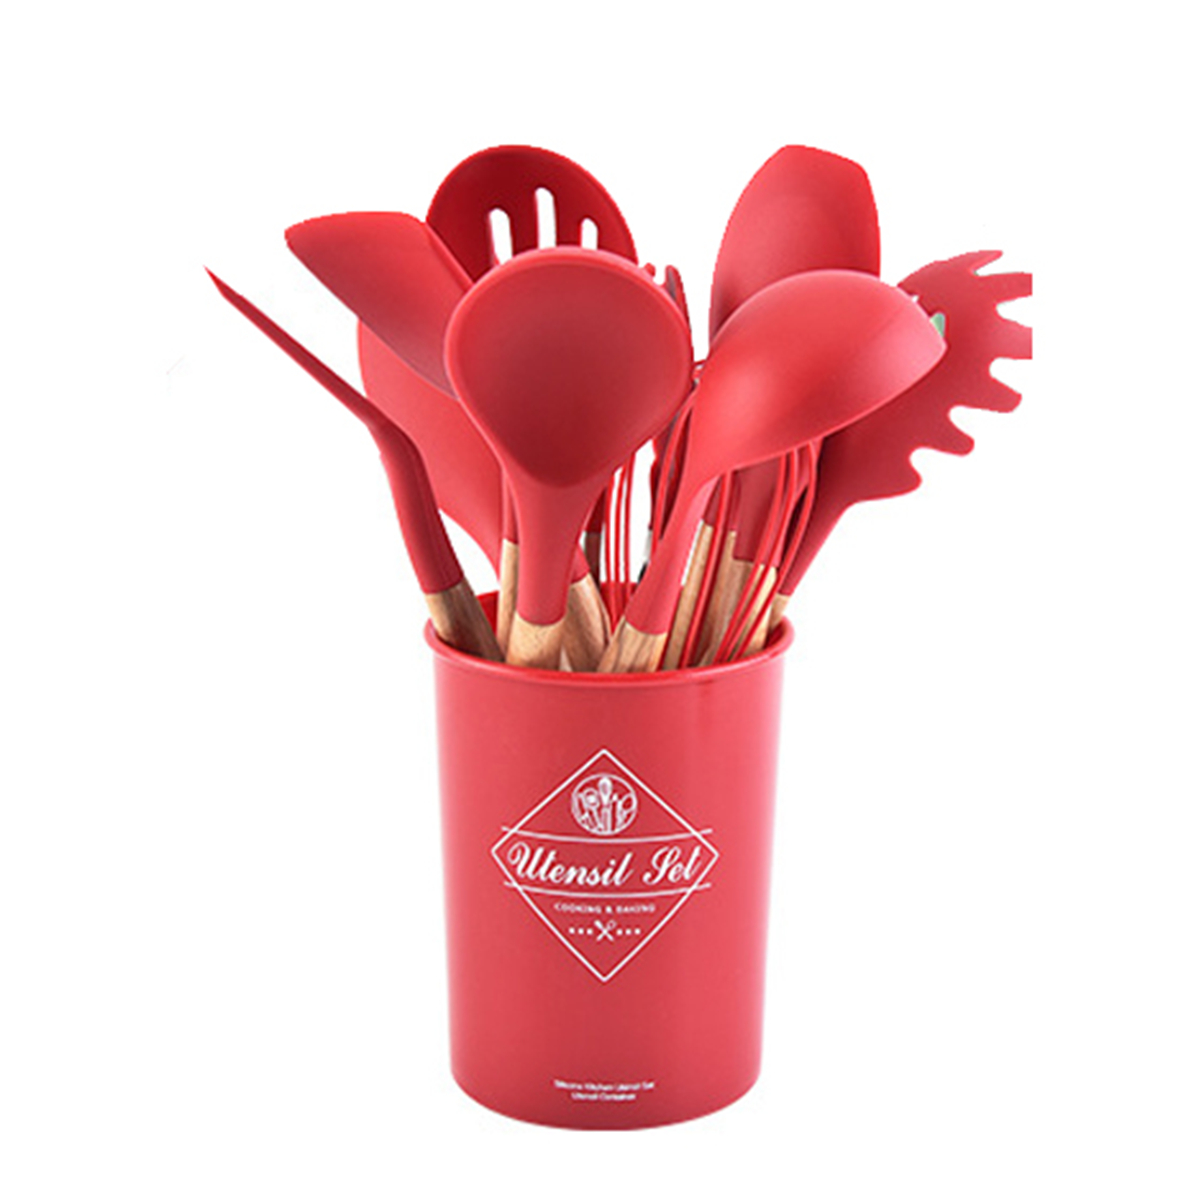 12-Pcs-Tableware-Set-Silicone-Wooden-Handle-Flatware-Spoon-Tongs-Whisk-Brush-with-Storage-Box-Outdoo-1812163-11